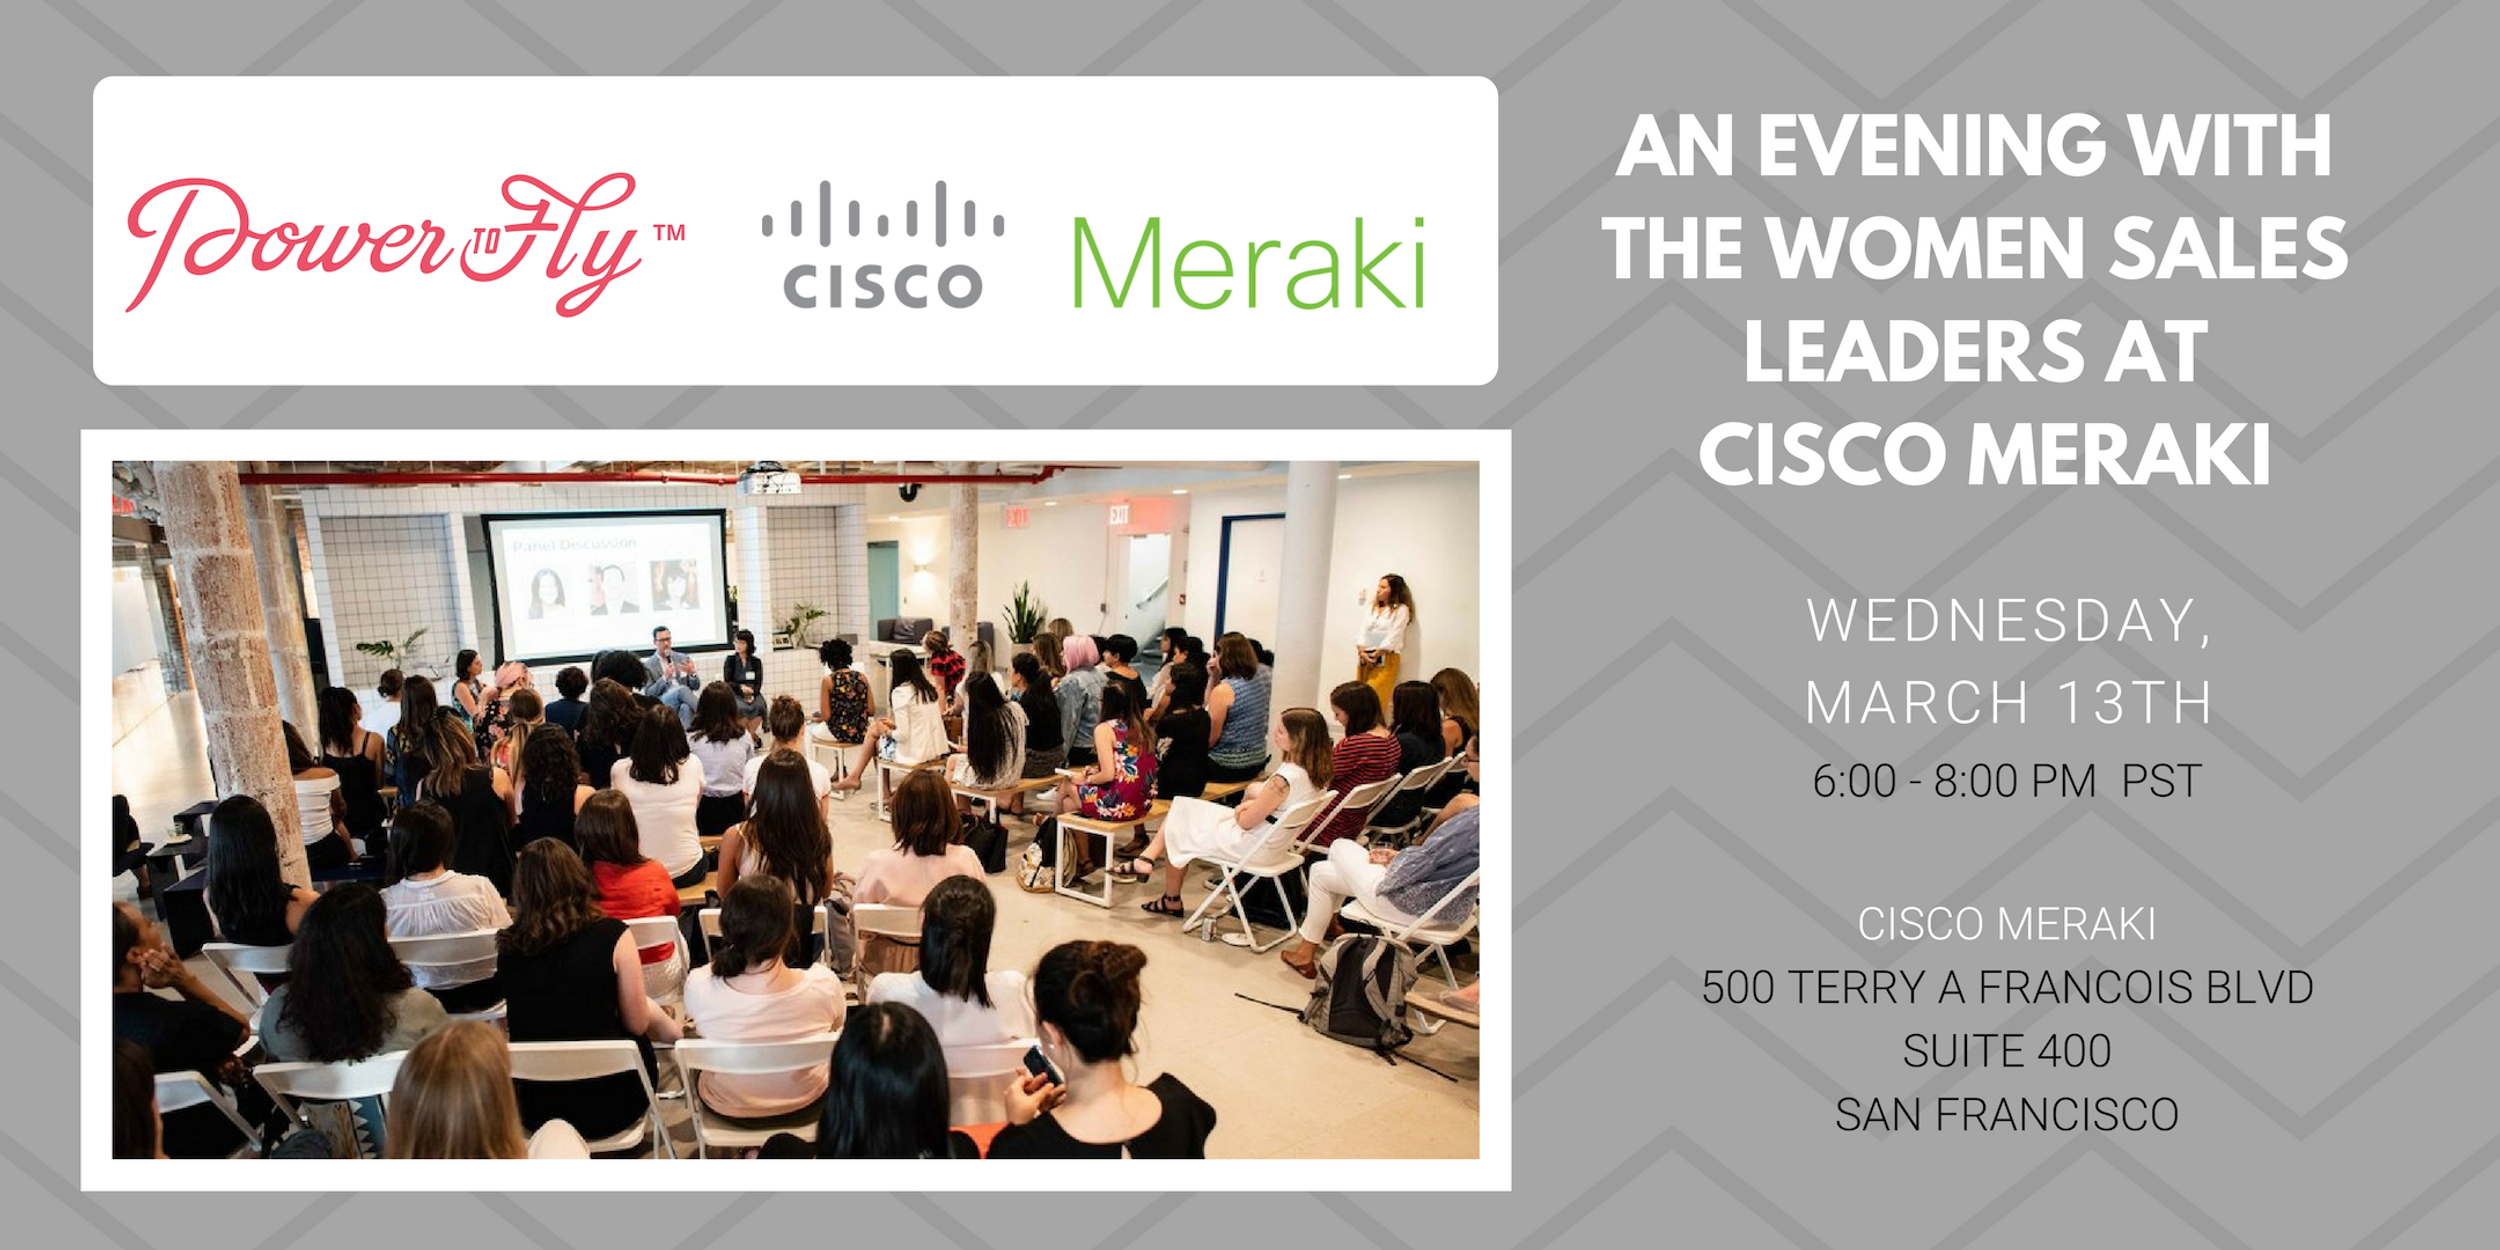 An Evening with the Women Sales Leaders at Cisco Meraki